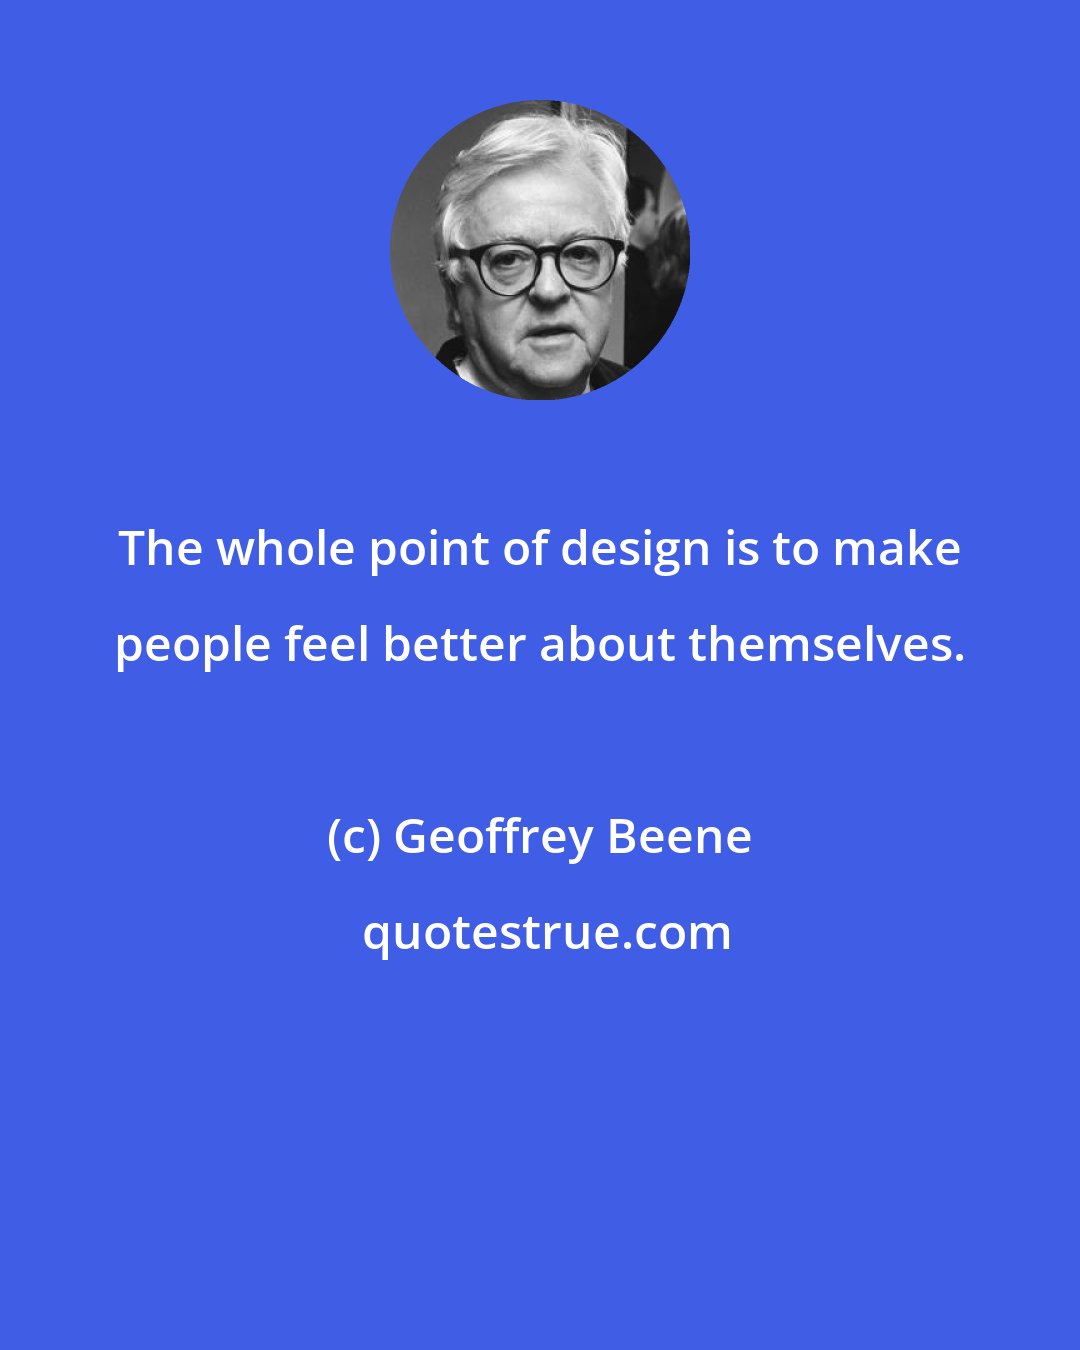 Geoffrey Beene: The whole point of design is to make people feel better about themselves.